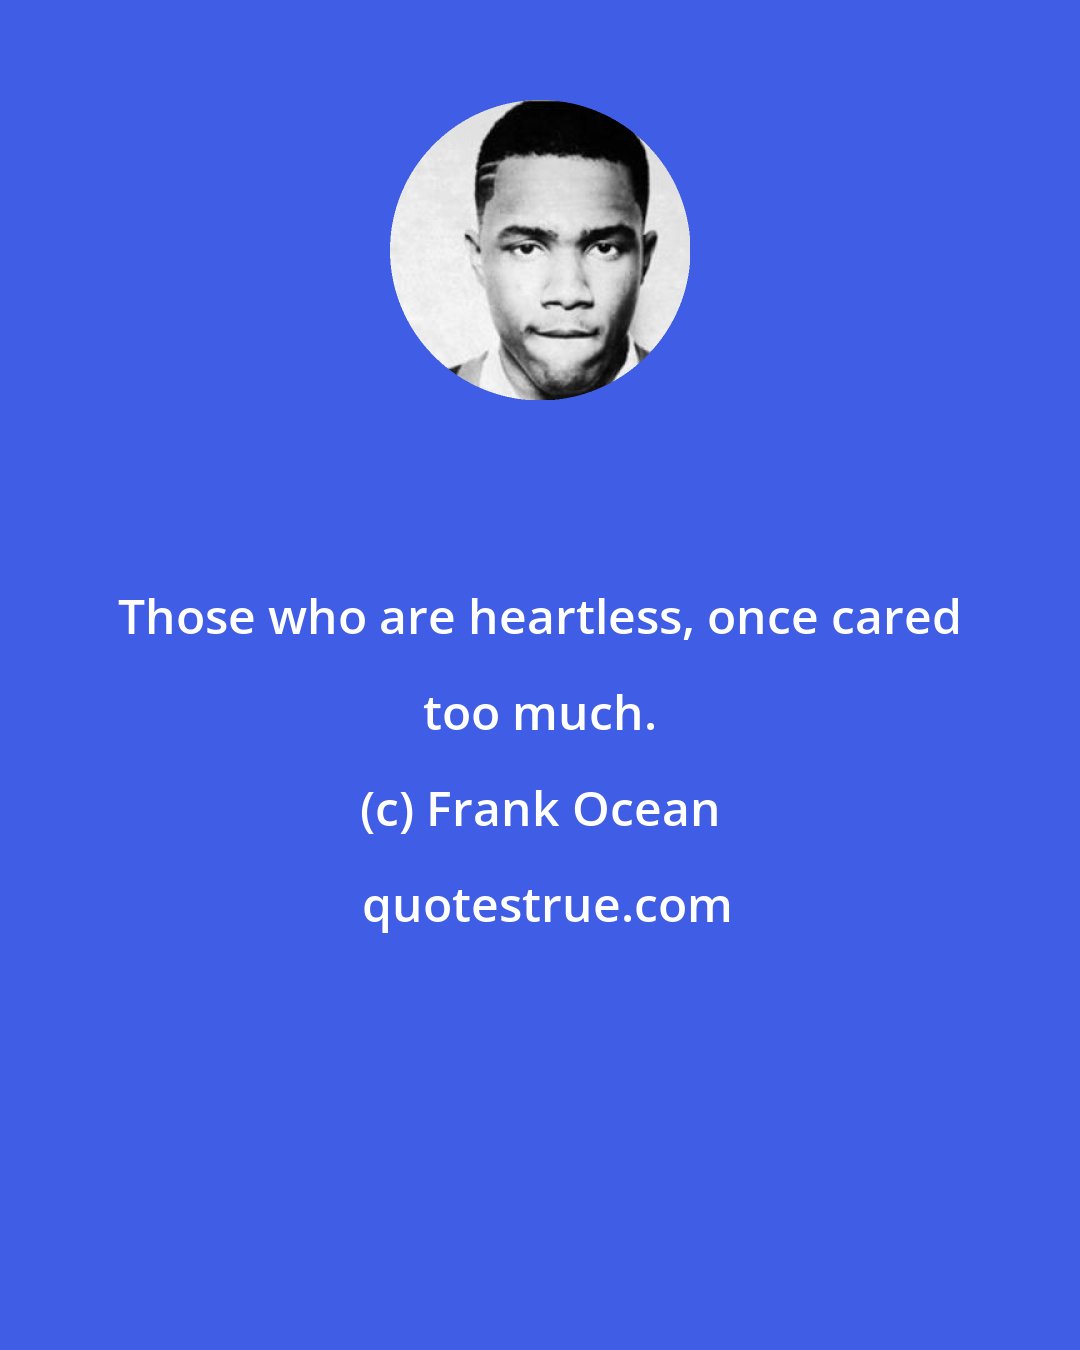 Frank Ocean: Those who are heartless, once cared too much.